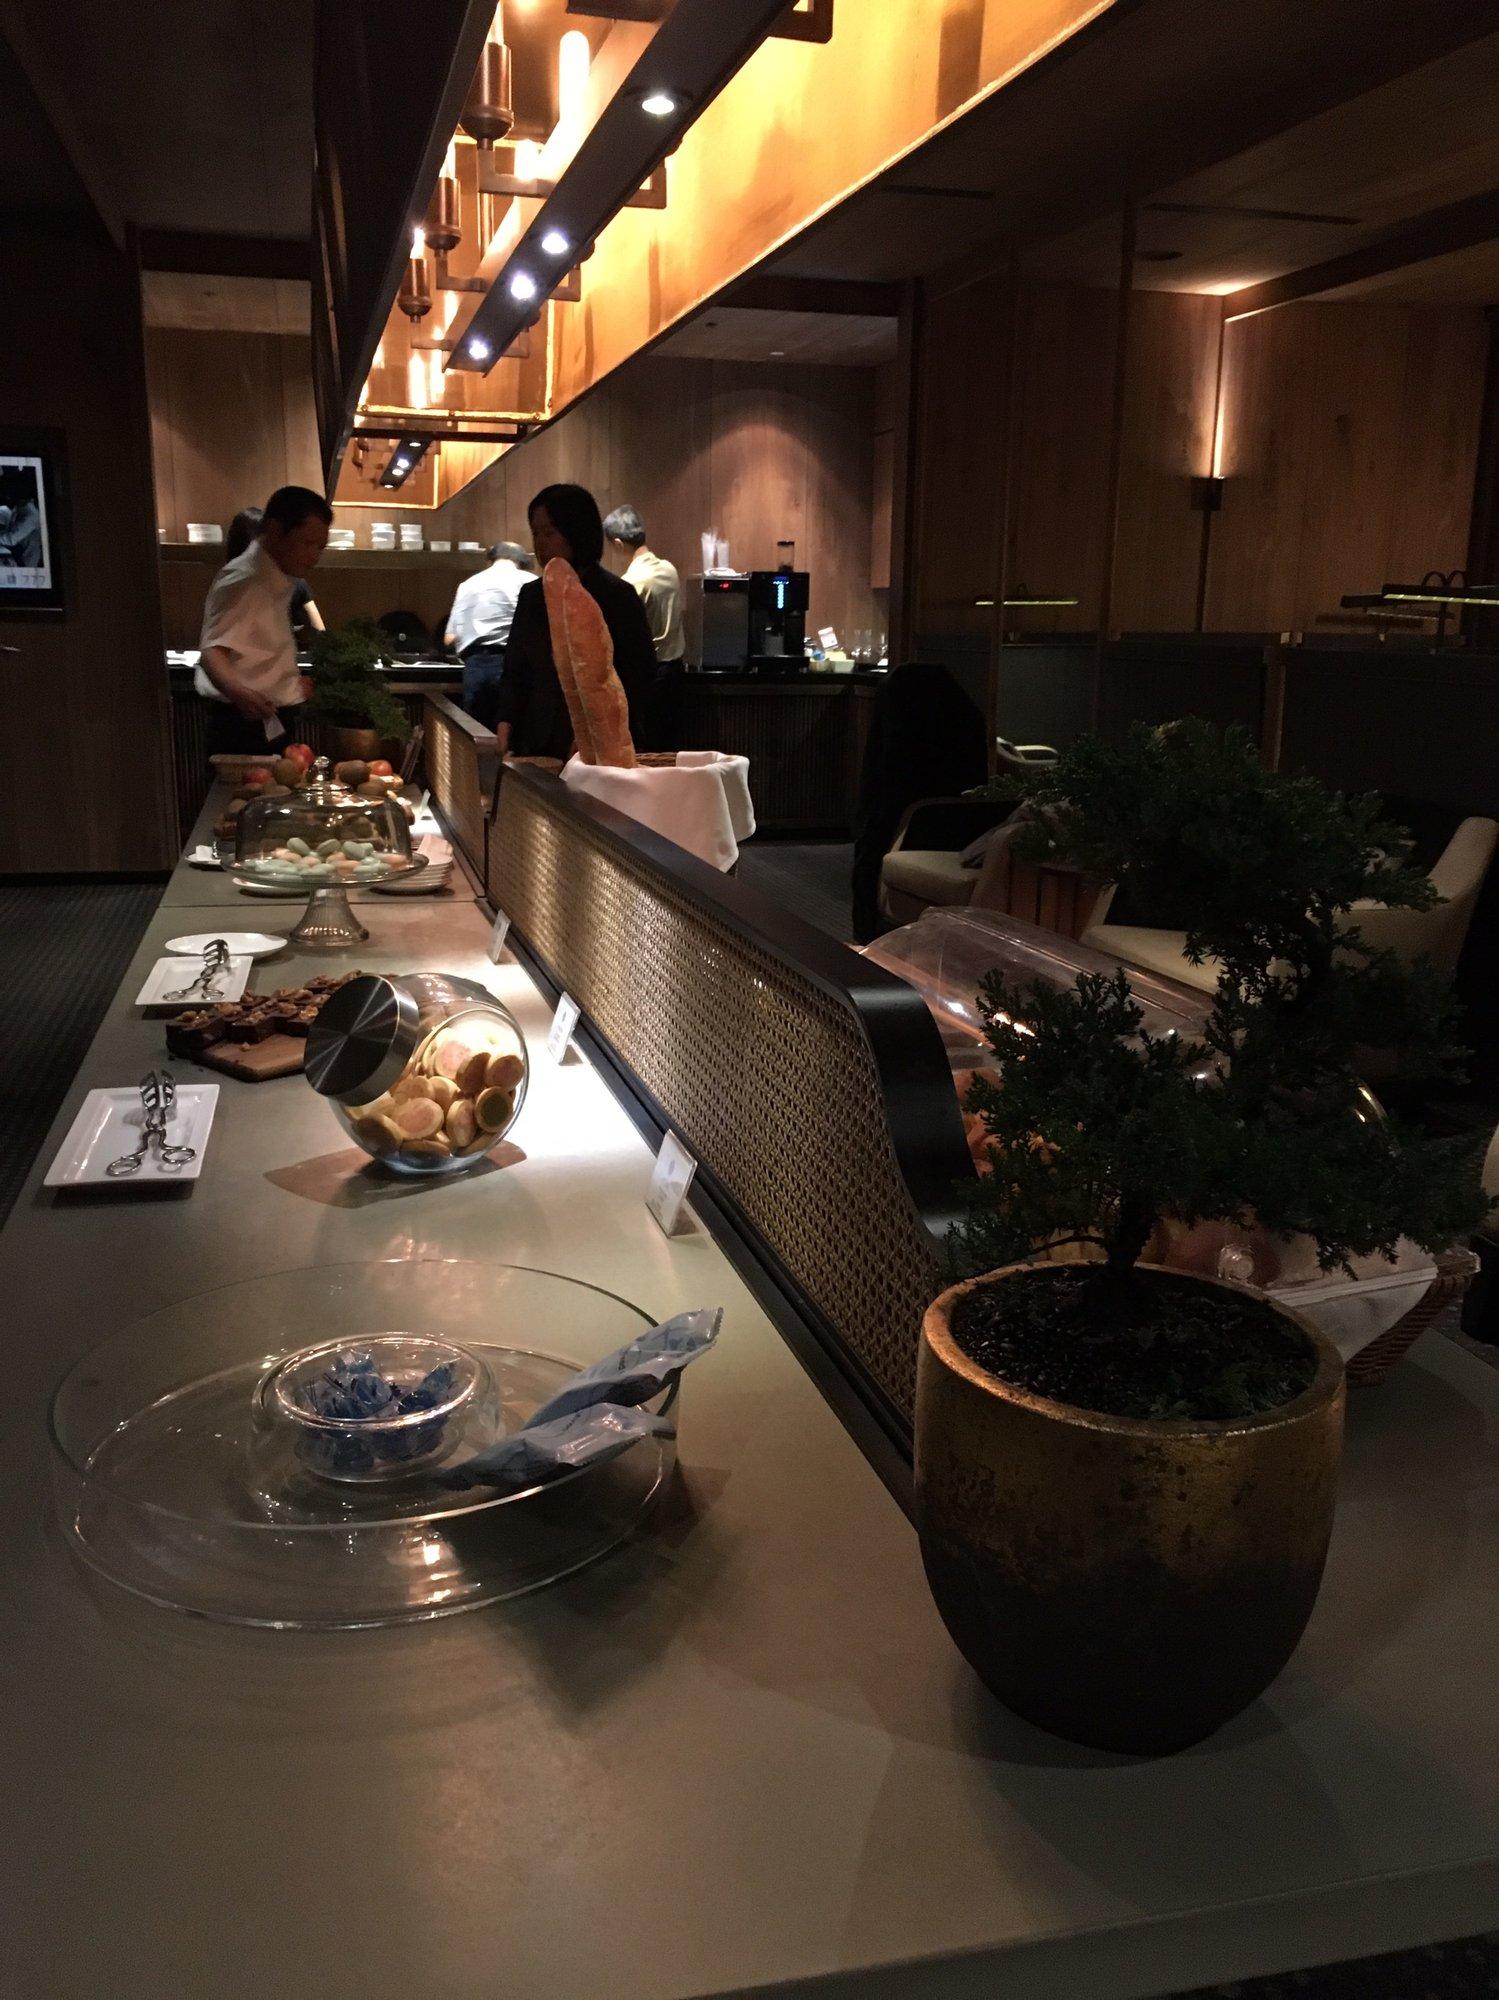 China Airlines Lounge (V1) image 13 of 44